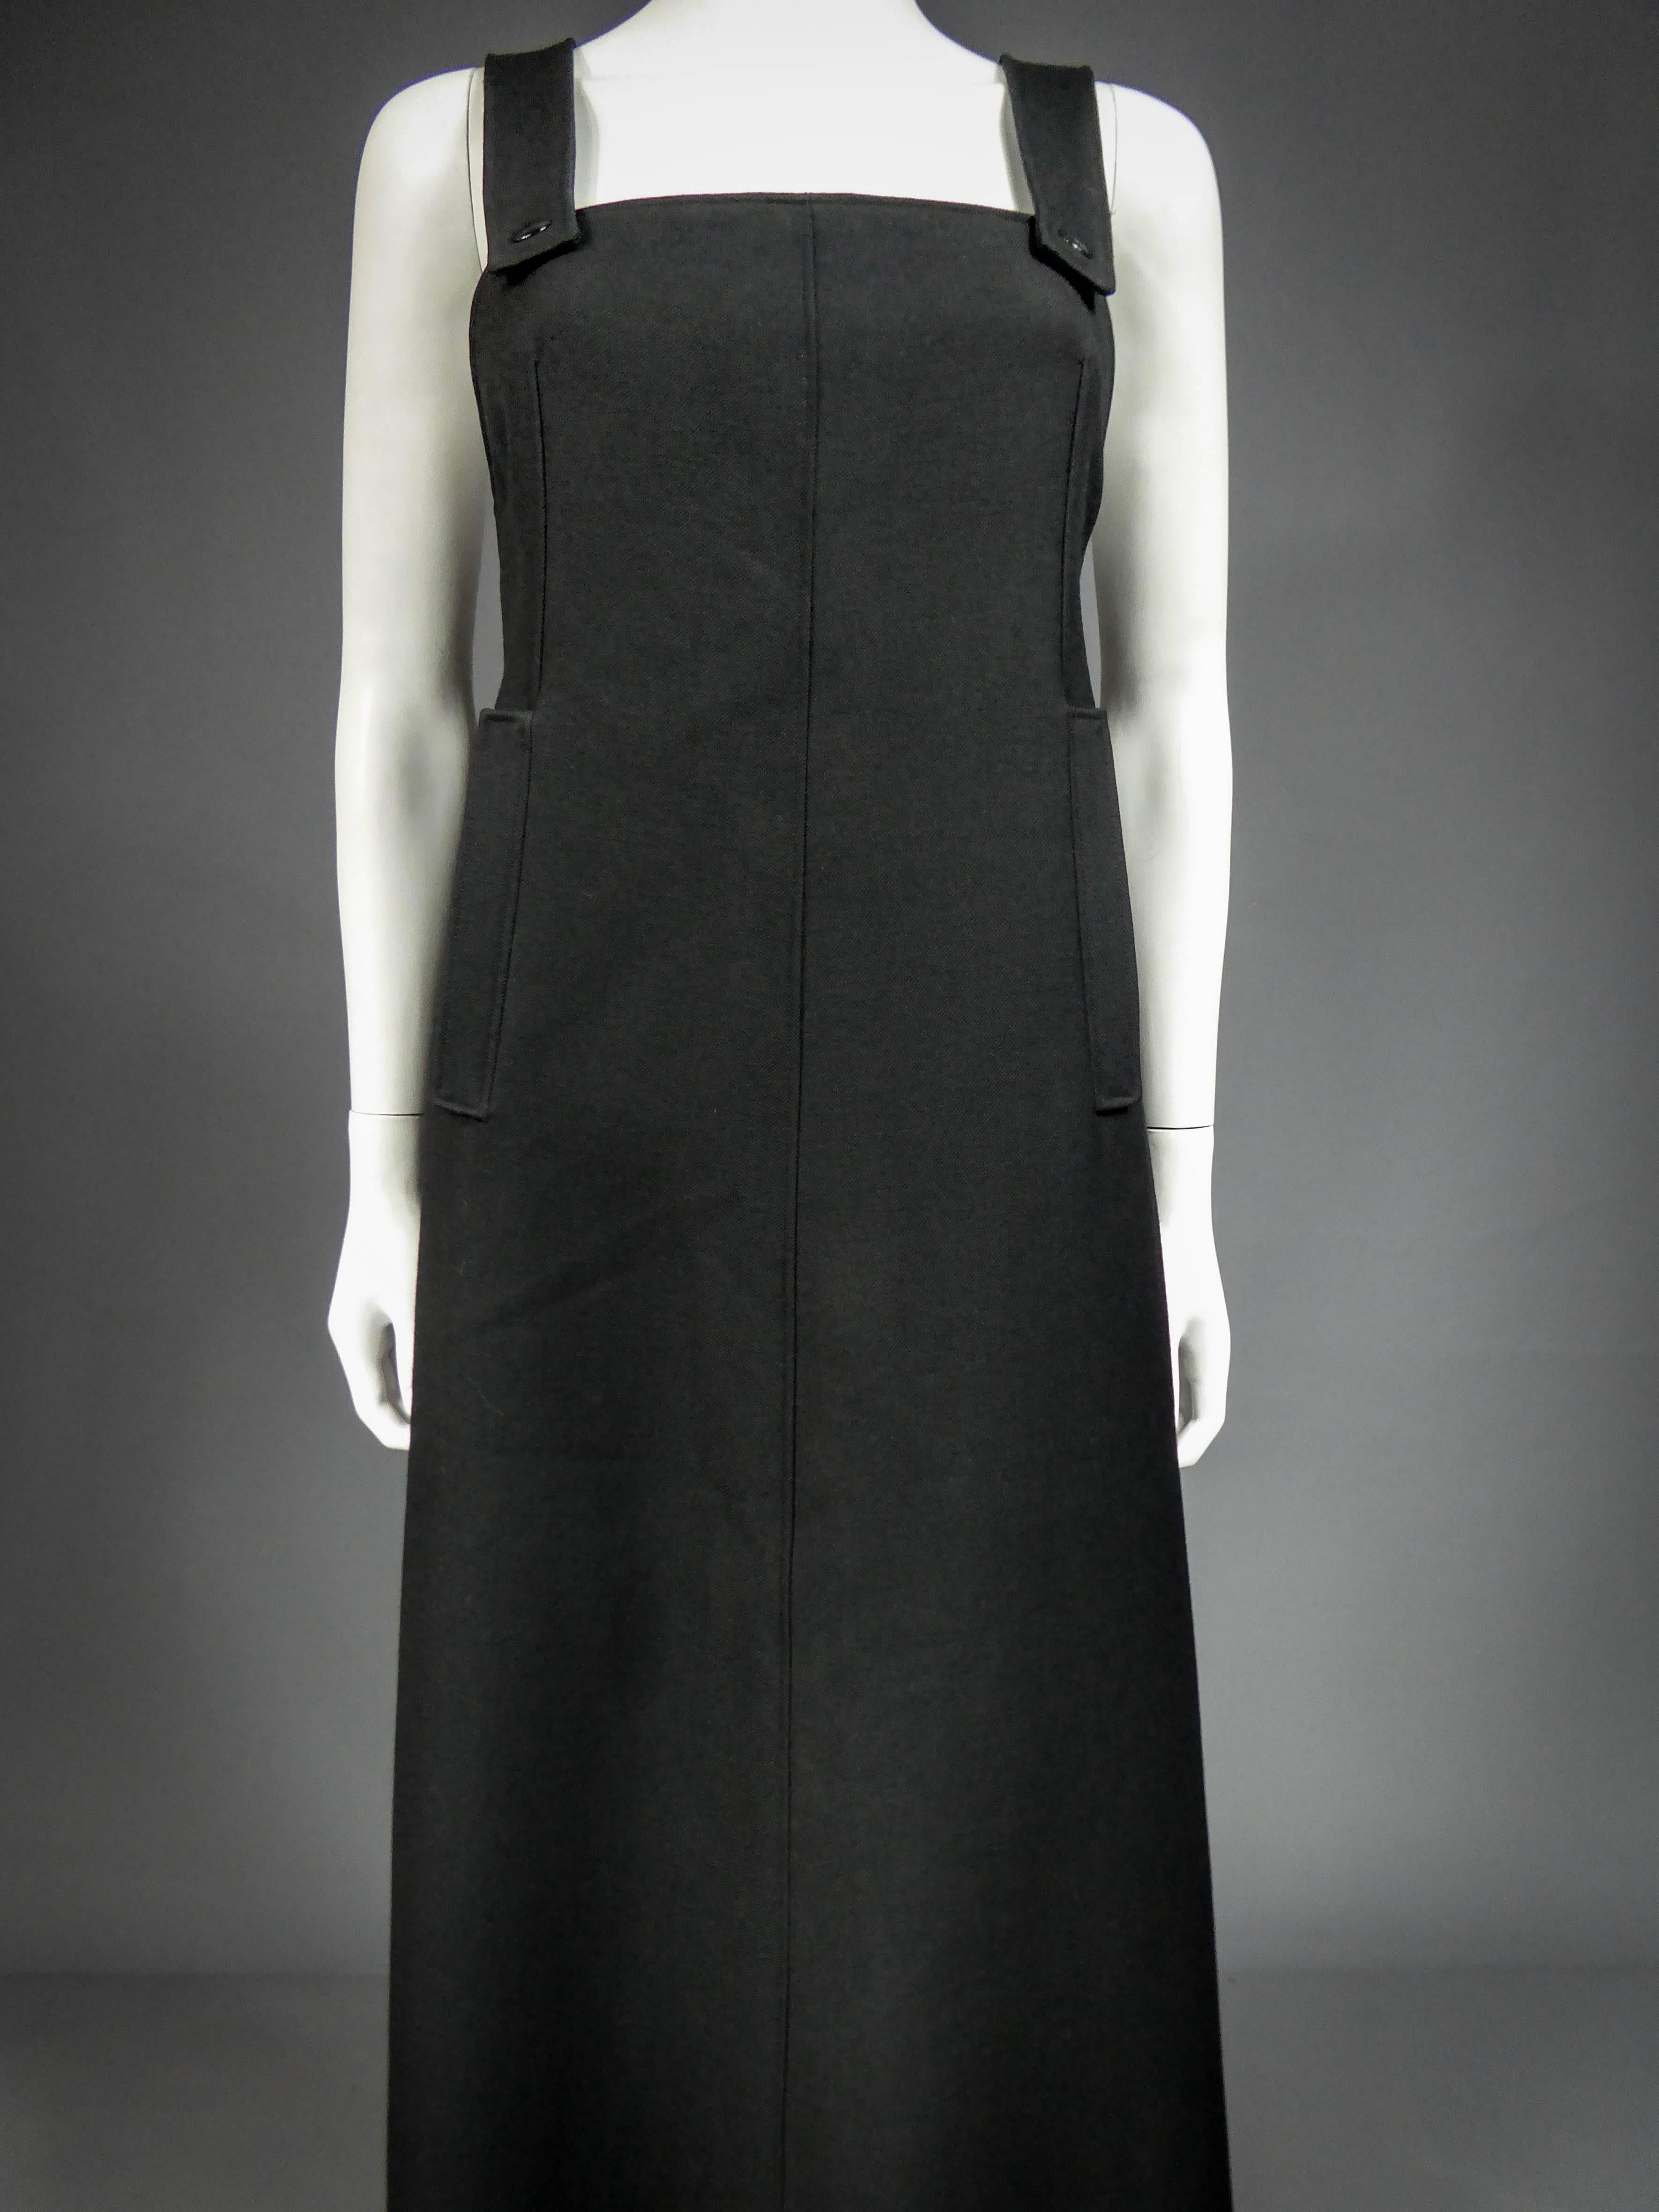 Black An André Courrèges Chasuble French Couture Dress Numbered 0031643 Circa 1970 For Sale